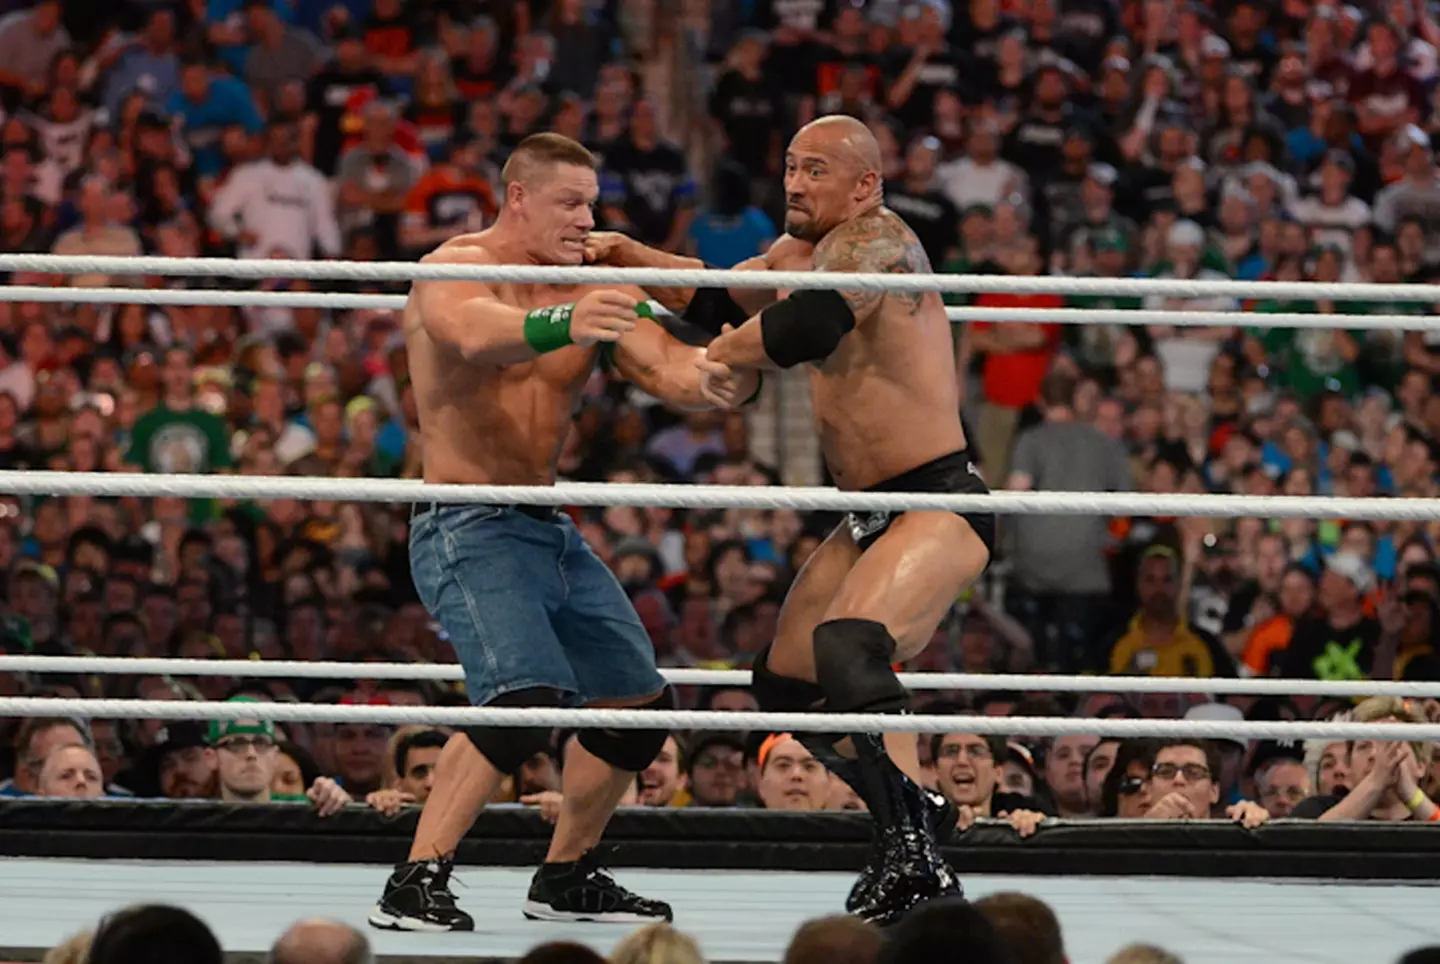 The last time Johnson fought in the WWE ring was against John Cena around 10 years ago.